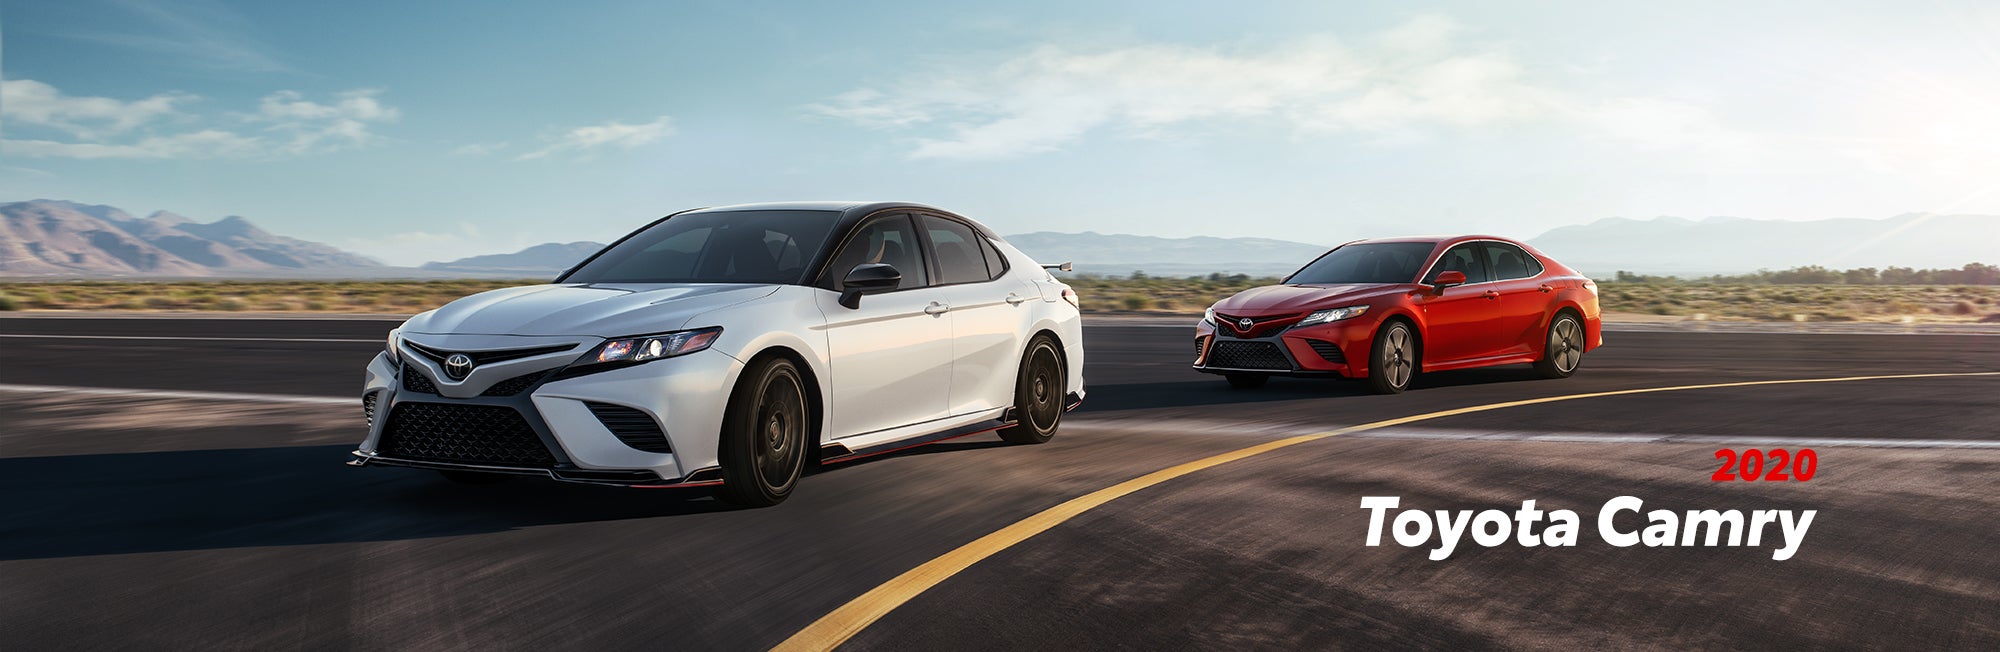 2020 Toyota Camry versus 2020 Honda Accord Comparison at Fiore Toyota | White and red 2020 Camry running on road